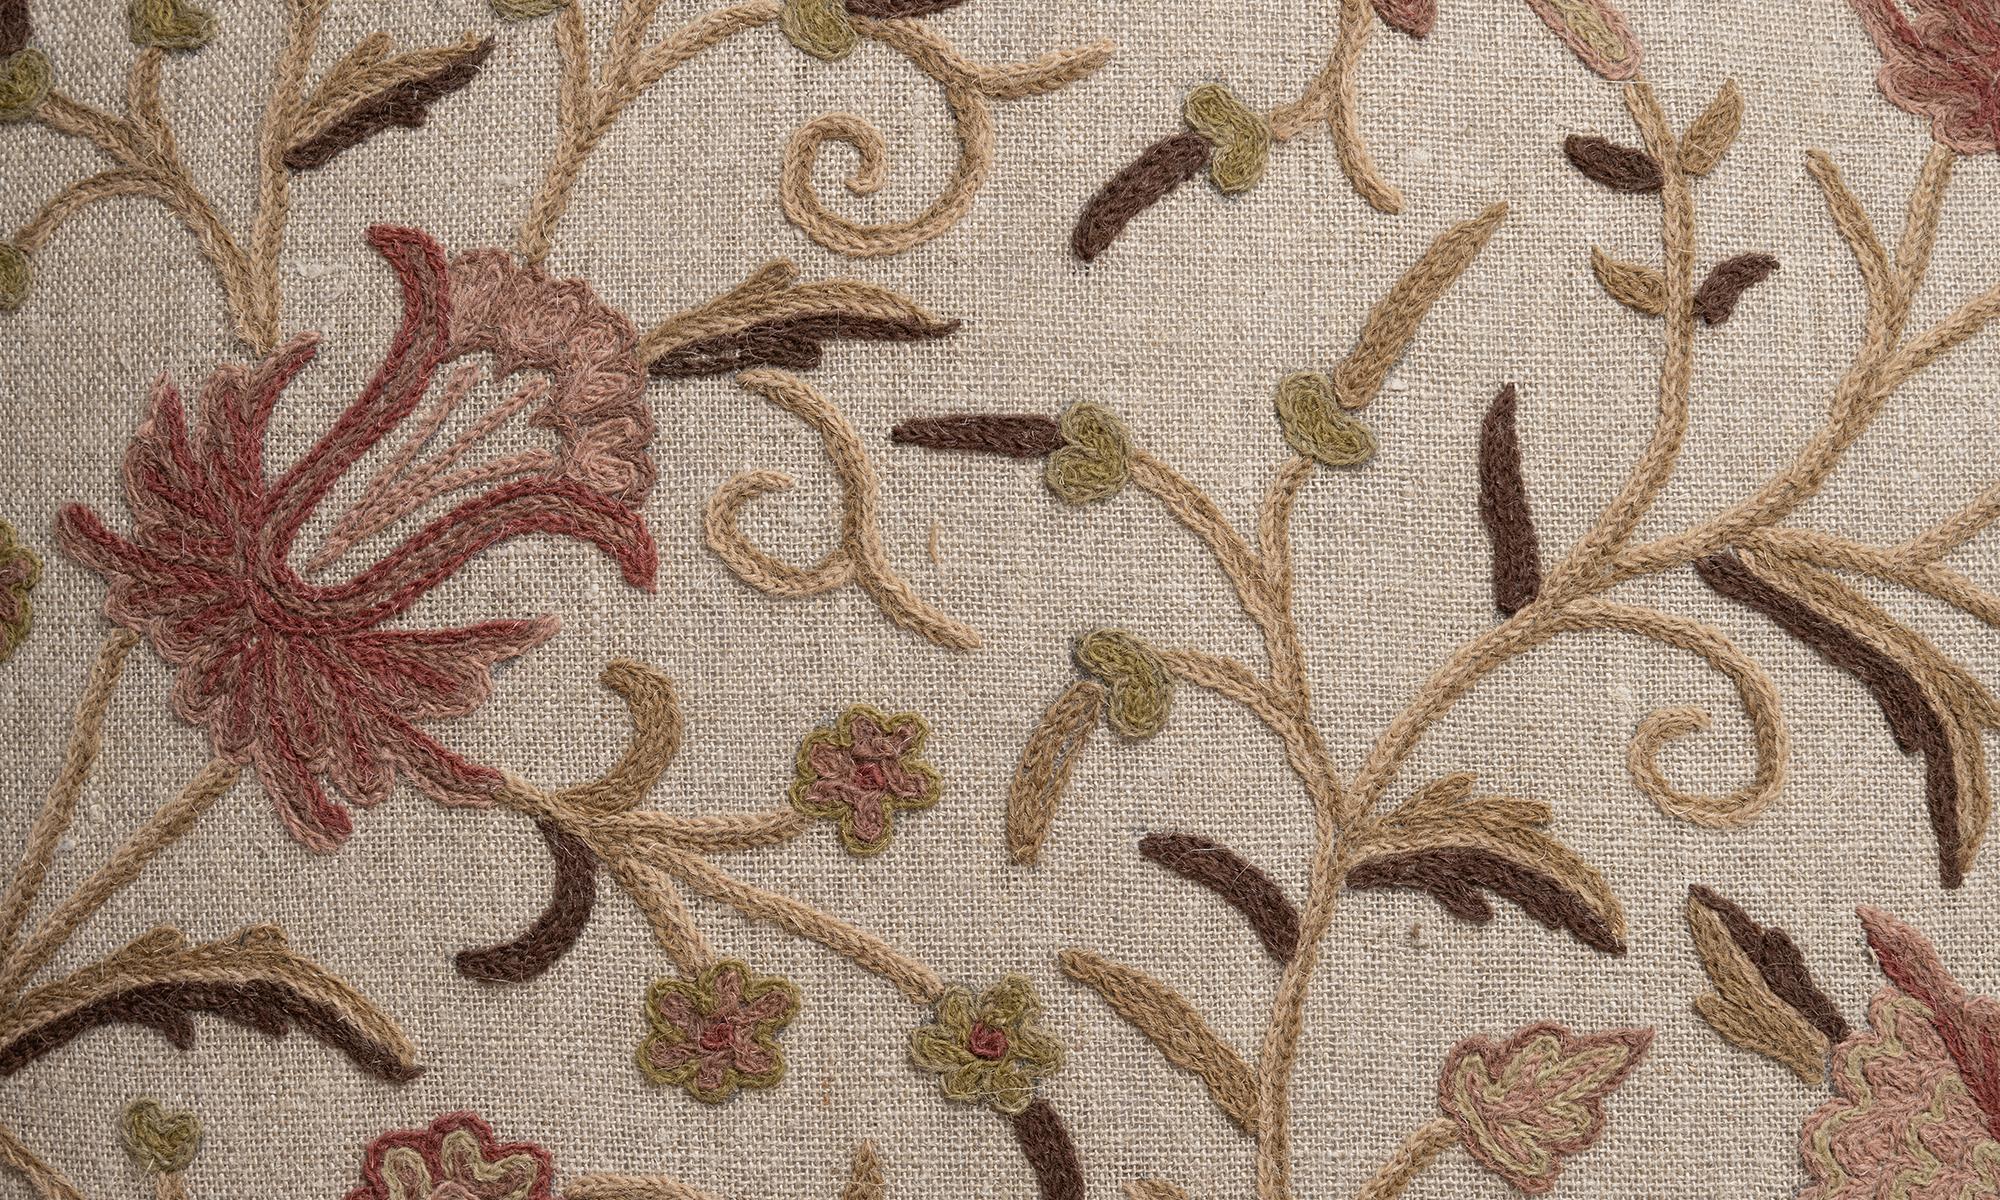 18th Century and Earlier Armchair in Embroidered Linen, France circa 1790